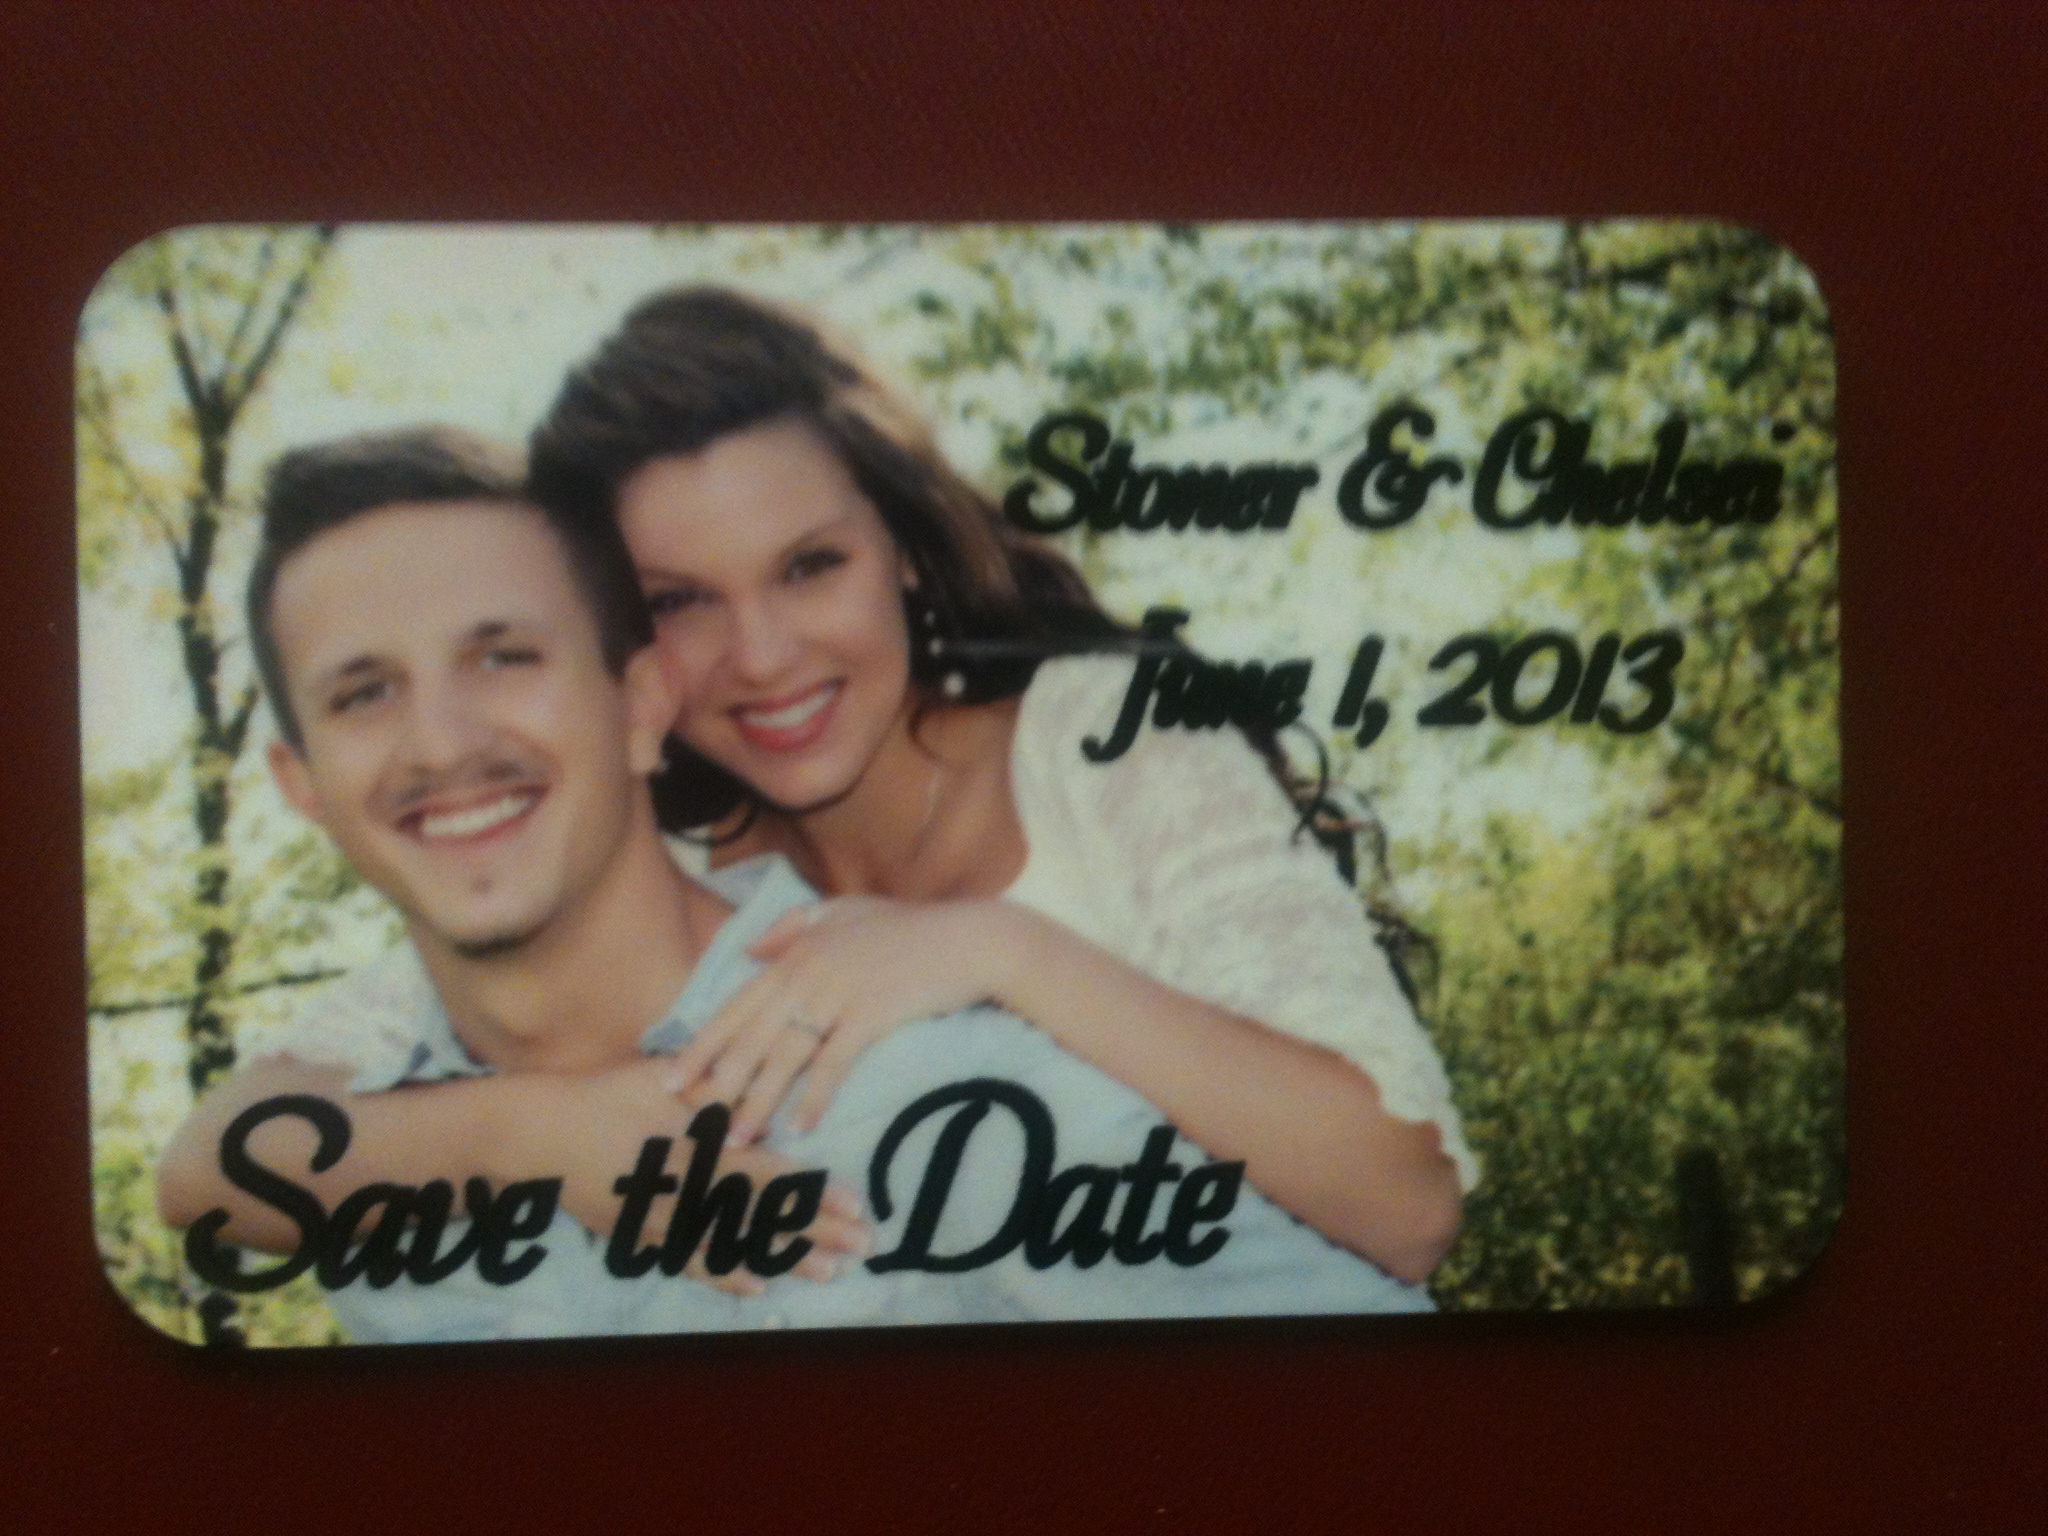 Save the Date made with sublimation printing